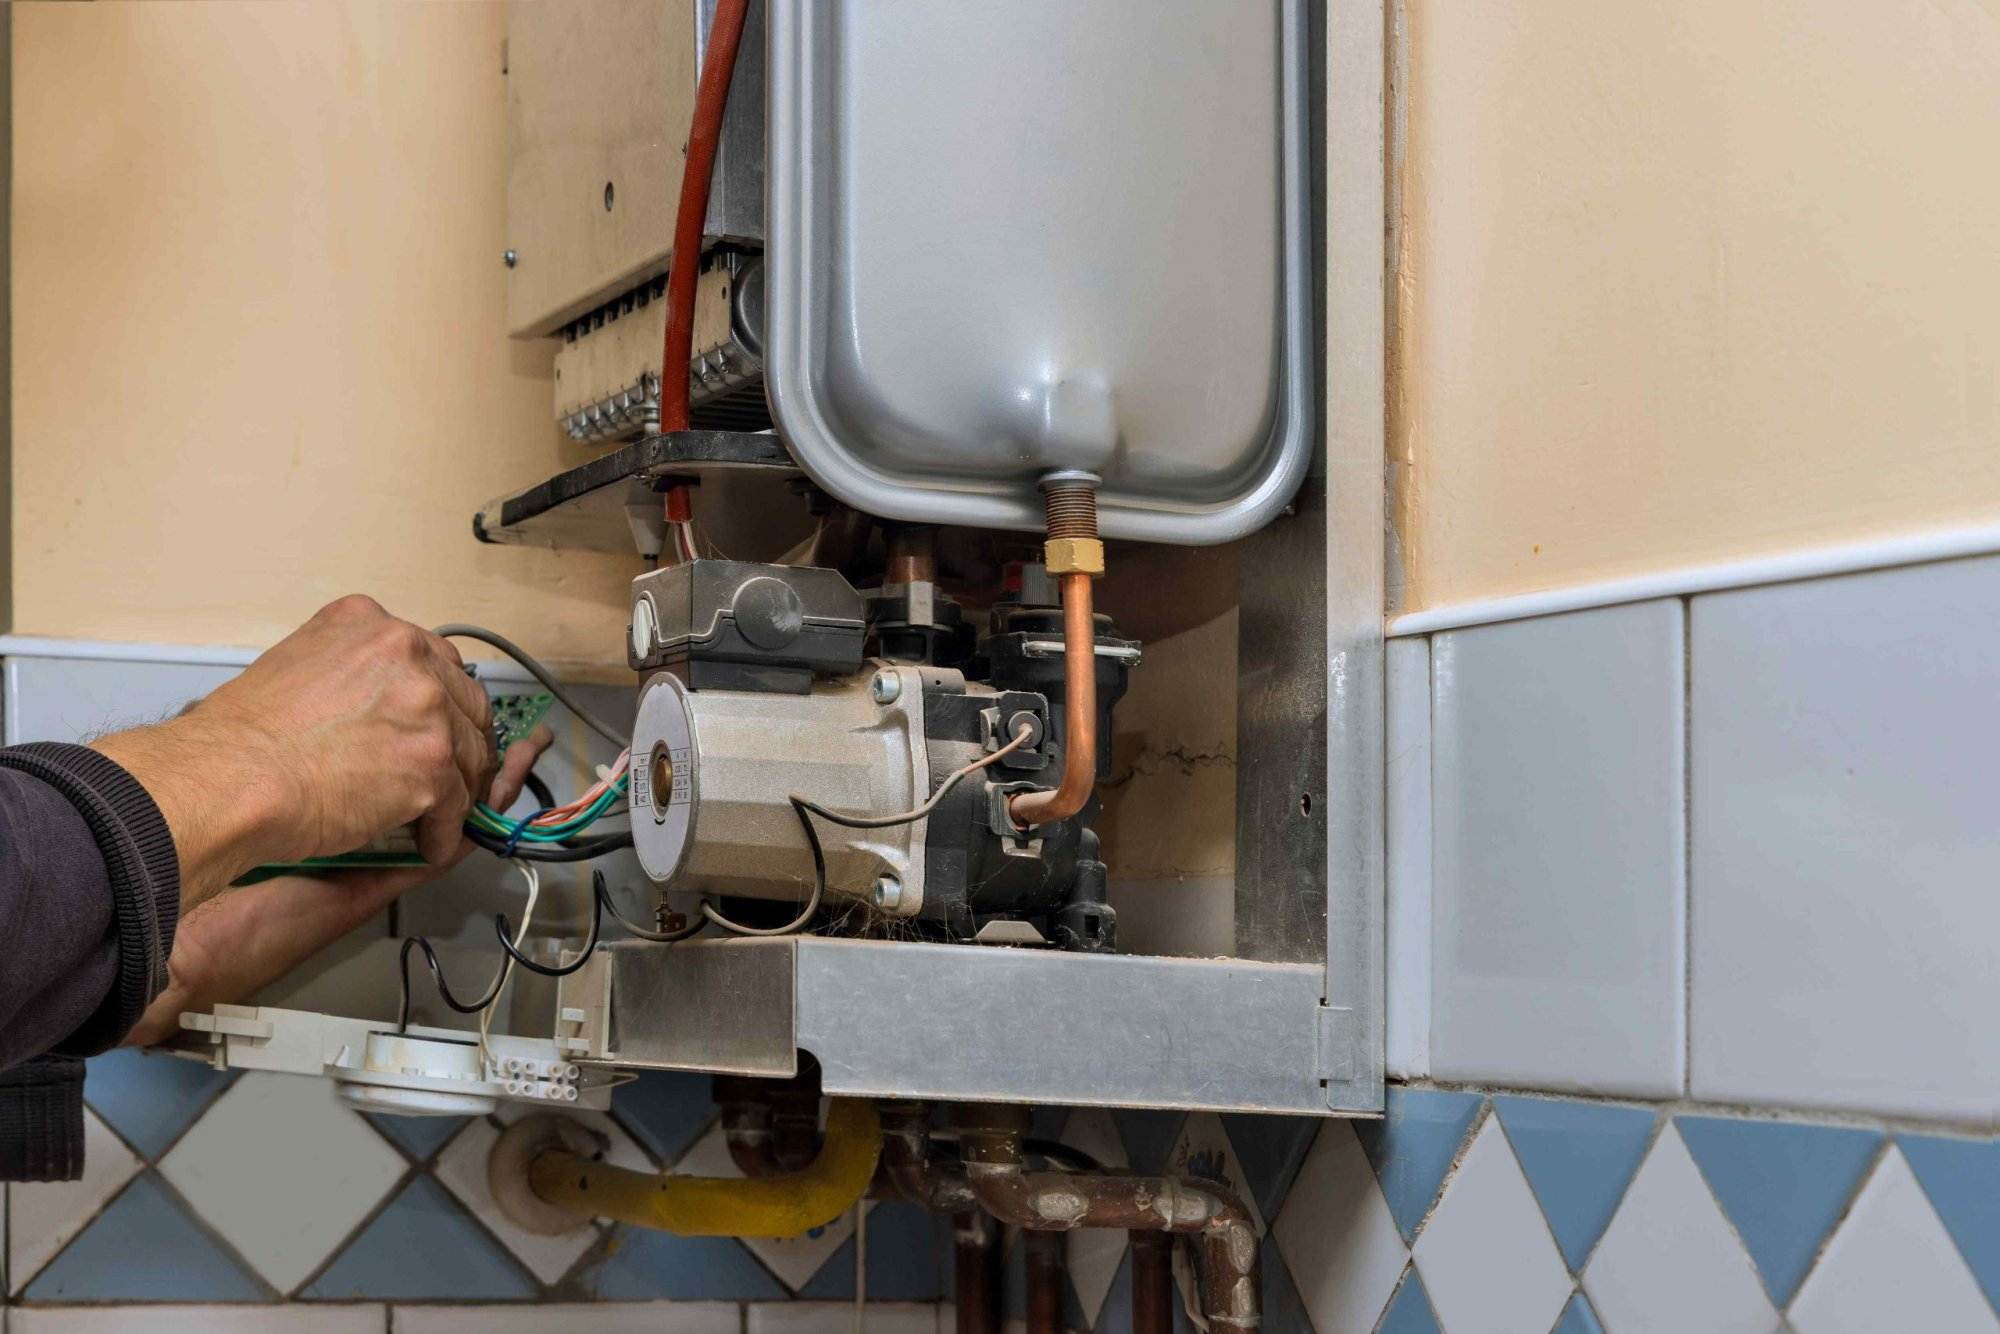 A man from Victor Plumbing fixing a water heater in a bathroom.